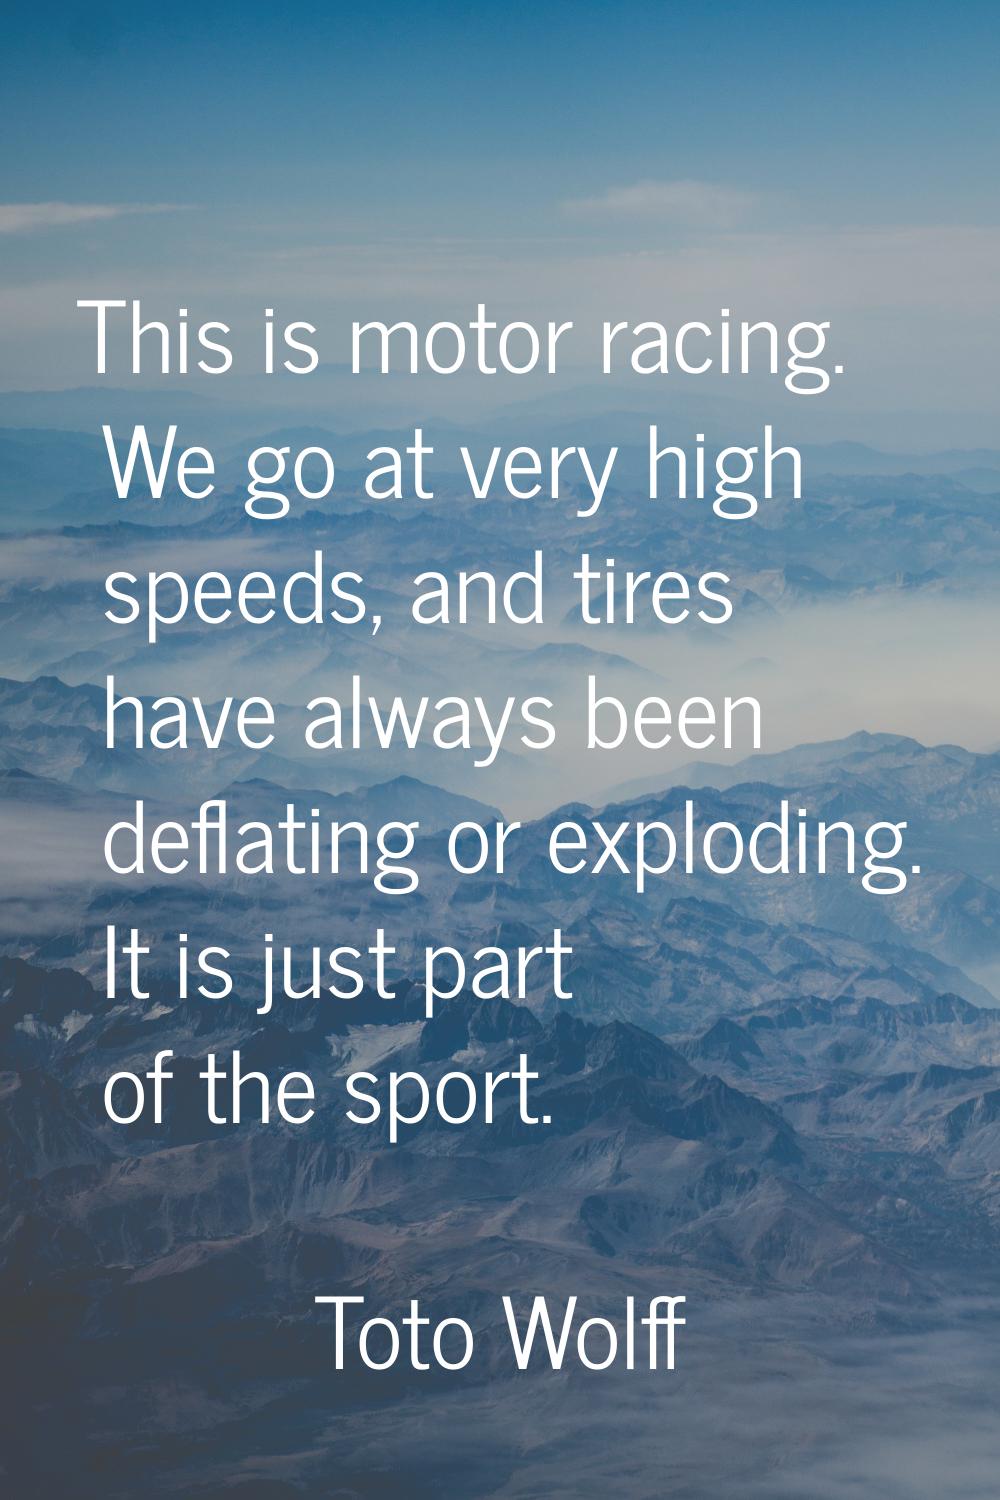 This is motor racing. We go at very high speeds, and tires have always been deflating or exploding.